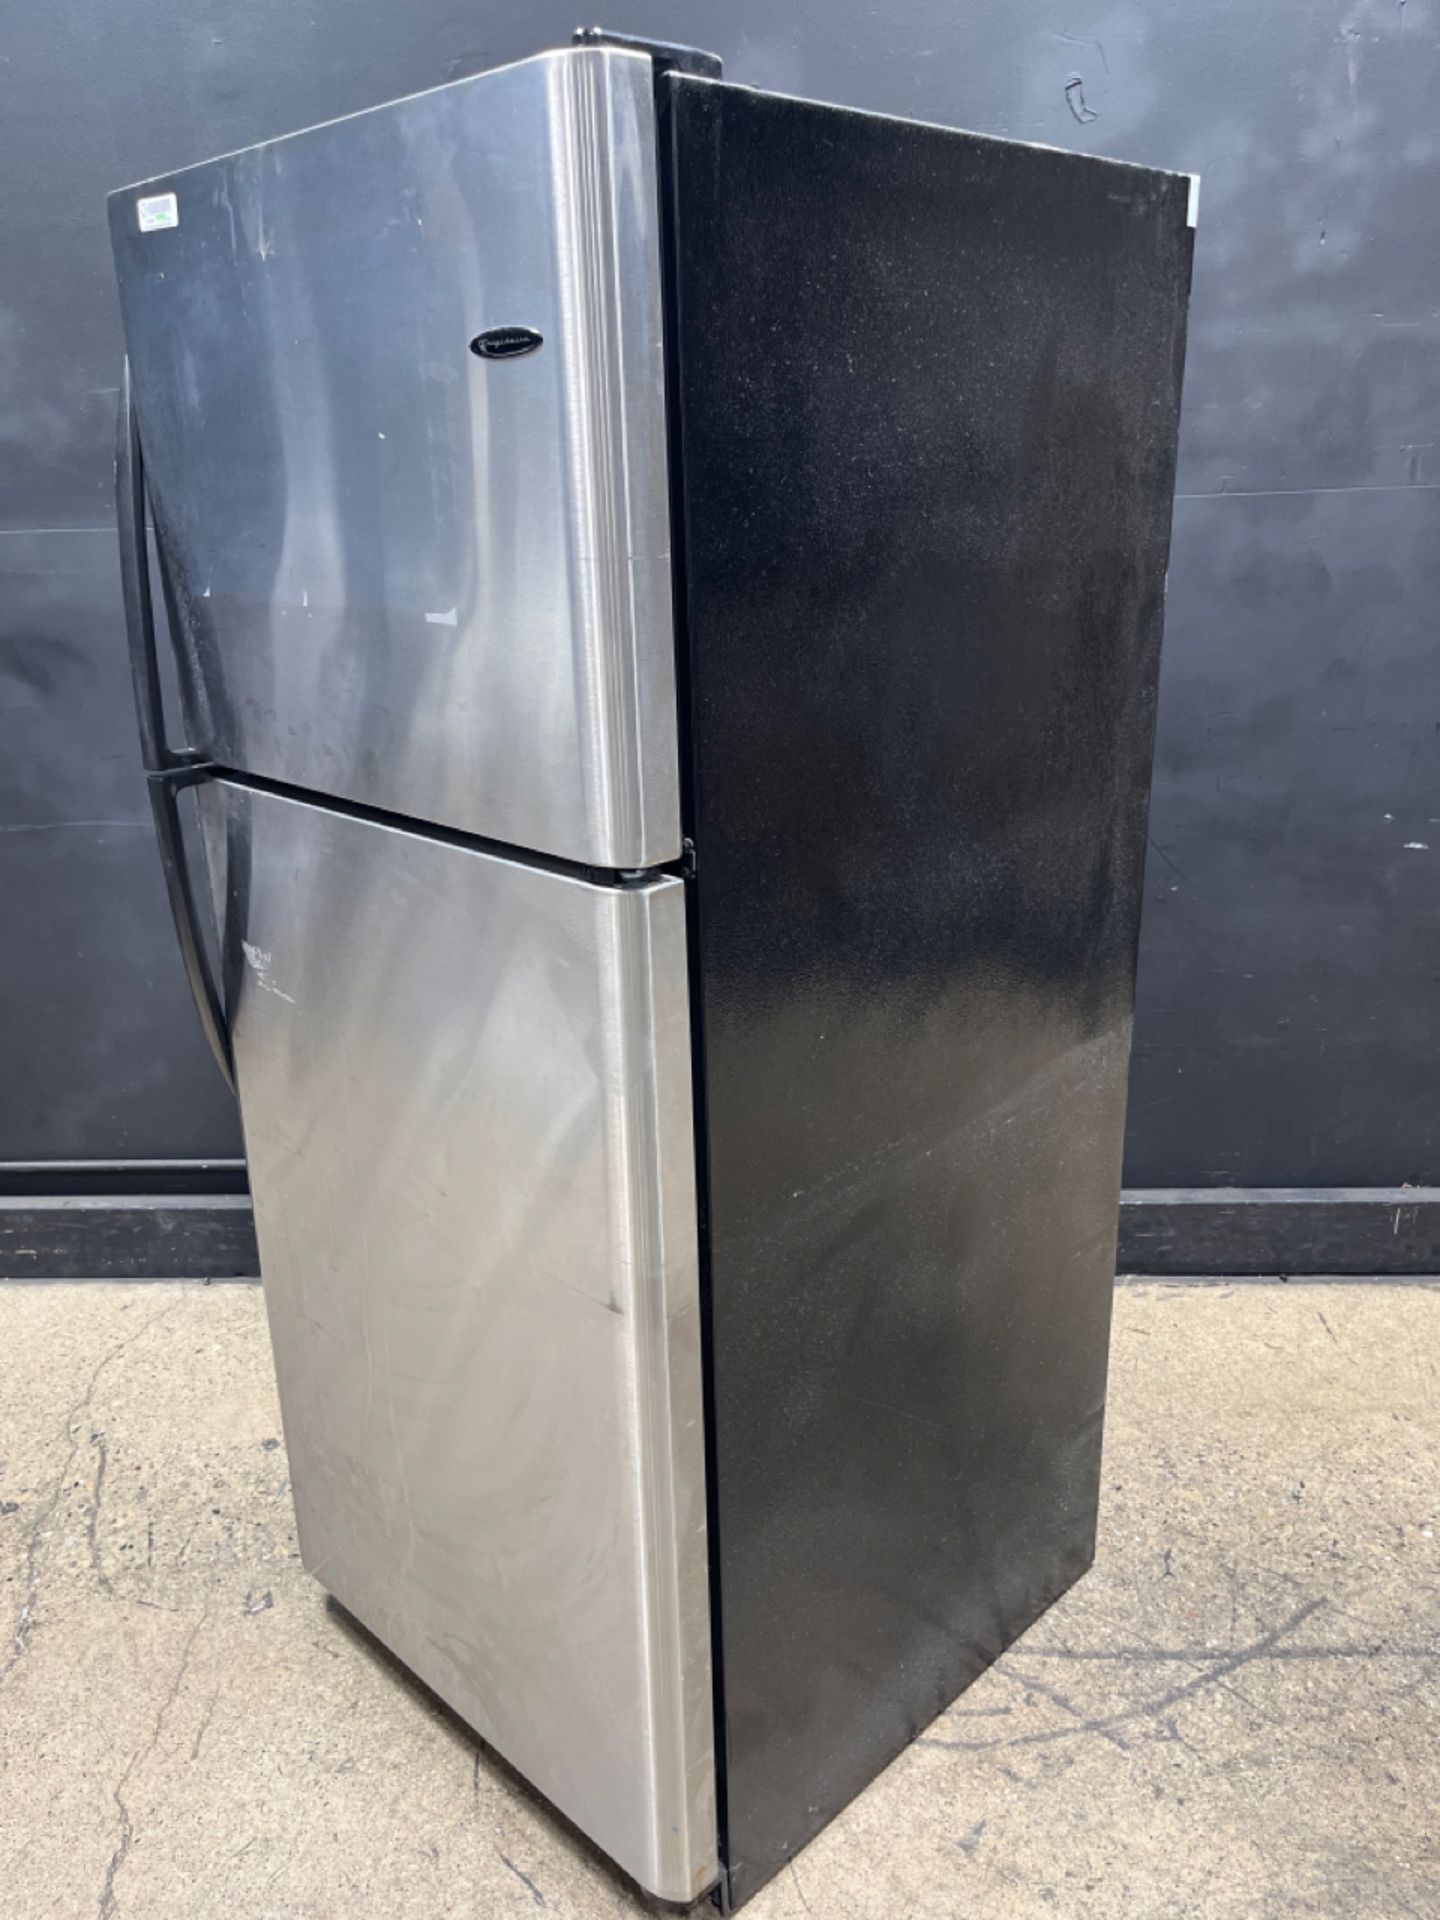 FRIGIDAIRE REFRIGERATOR (LOCATED AT 3325 MOUNT PROSPECT ROAD, FRANKLIN PARK, IL, 60131) - Image 2 of 4